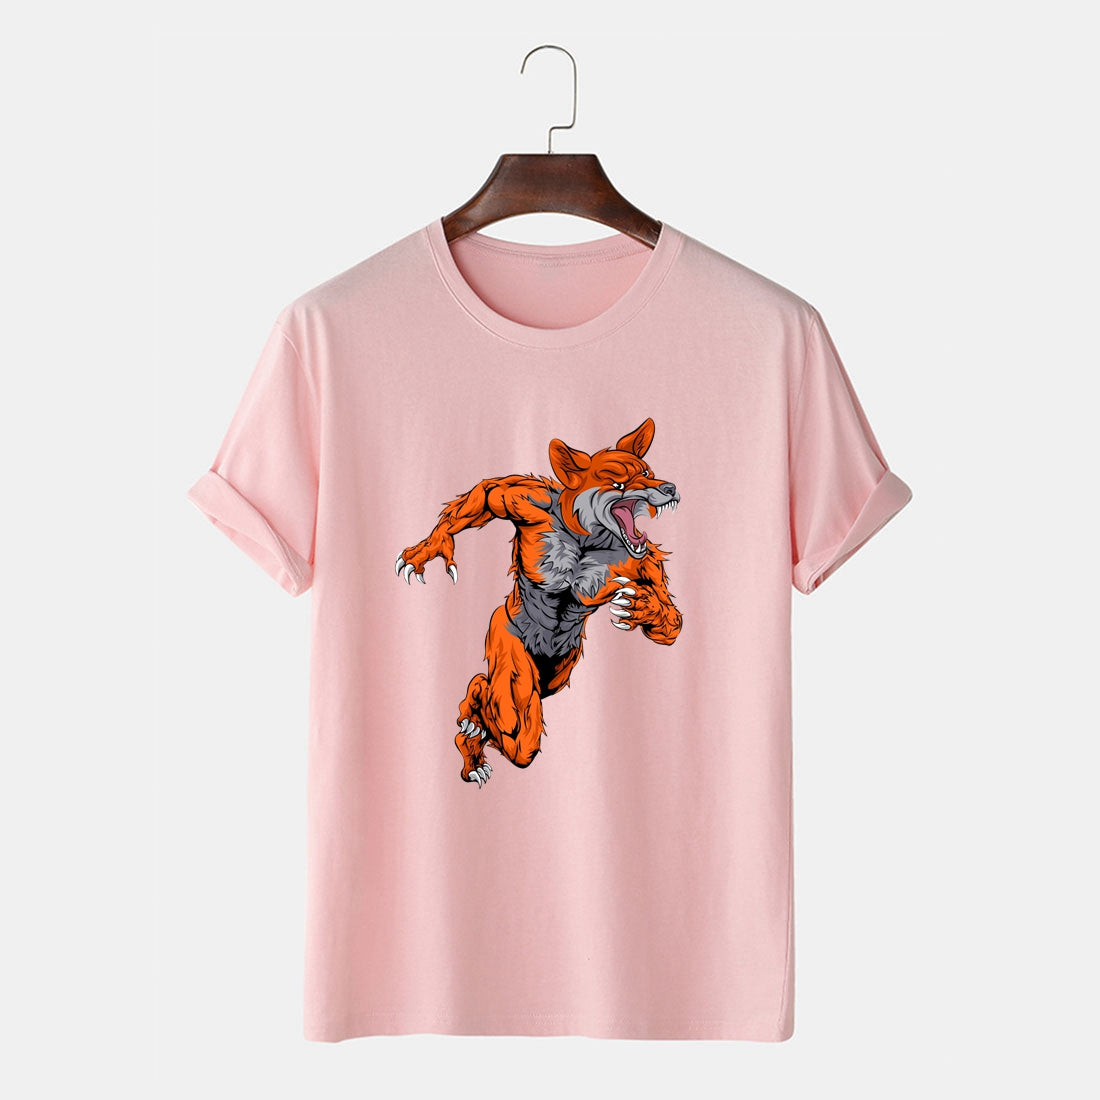 Fox T Shirt for Men Running Furious Fox Graphic Printed Fitness Cotton Tops